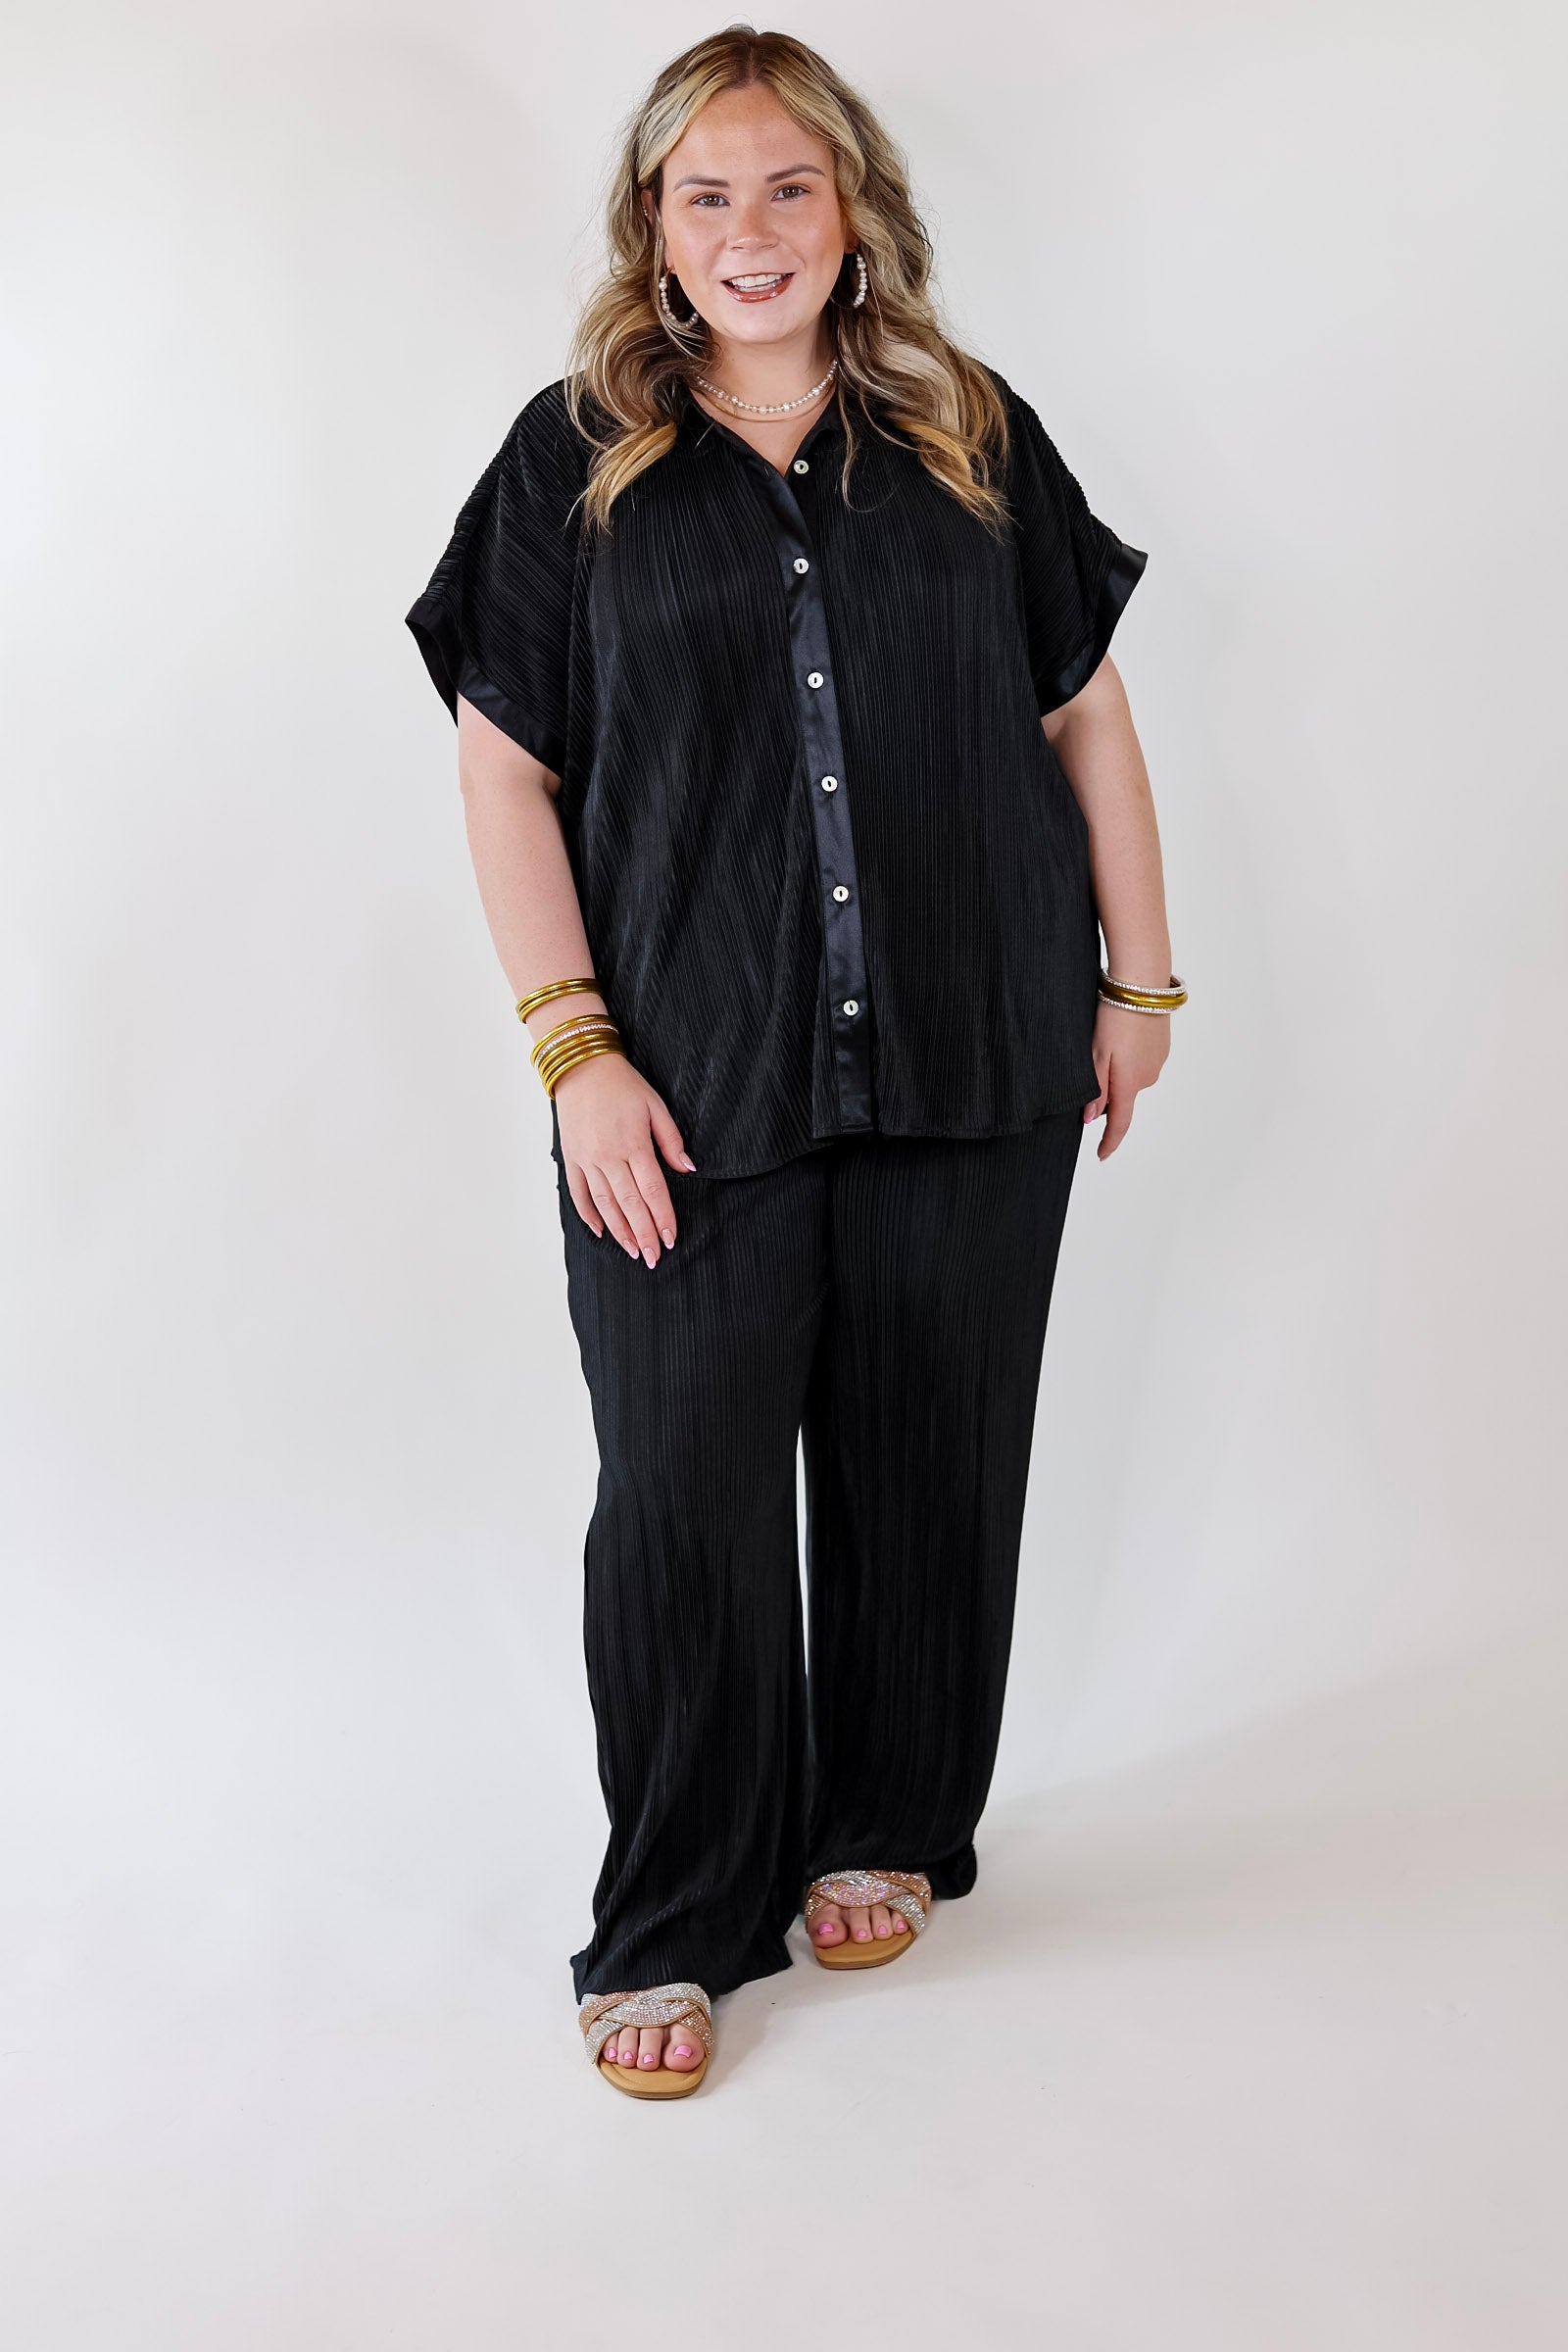 Walking In Paradise Plissé Drawstring Pants in Black - Giddy Up Glamour Boutique